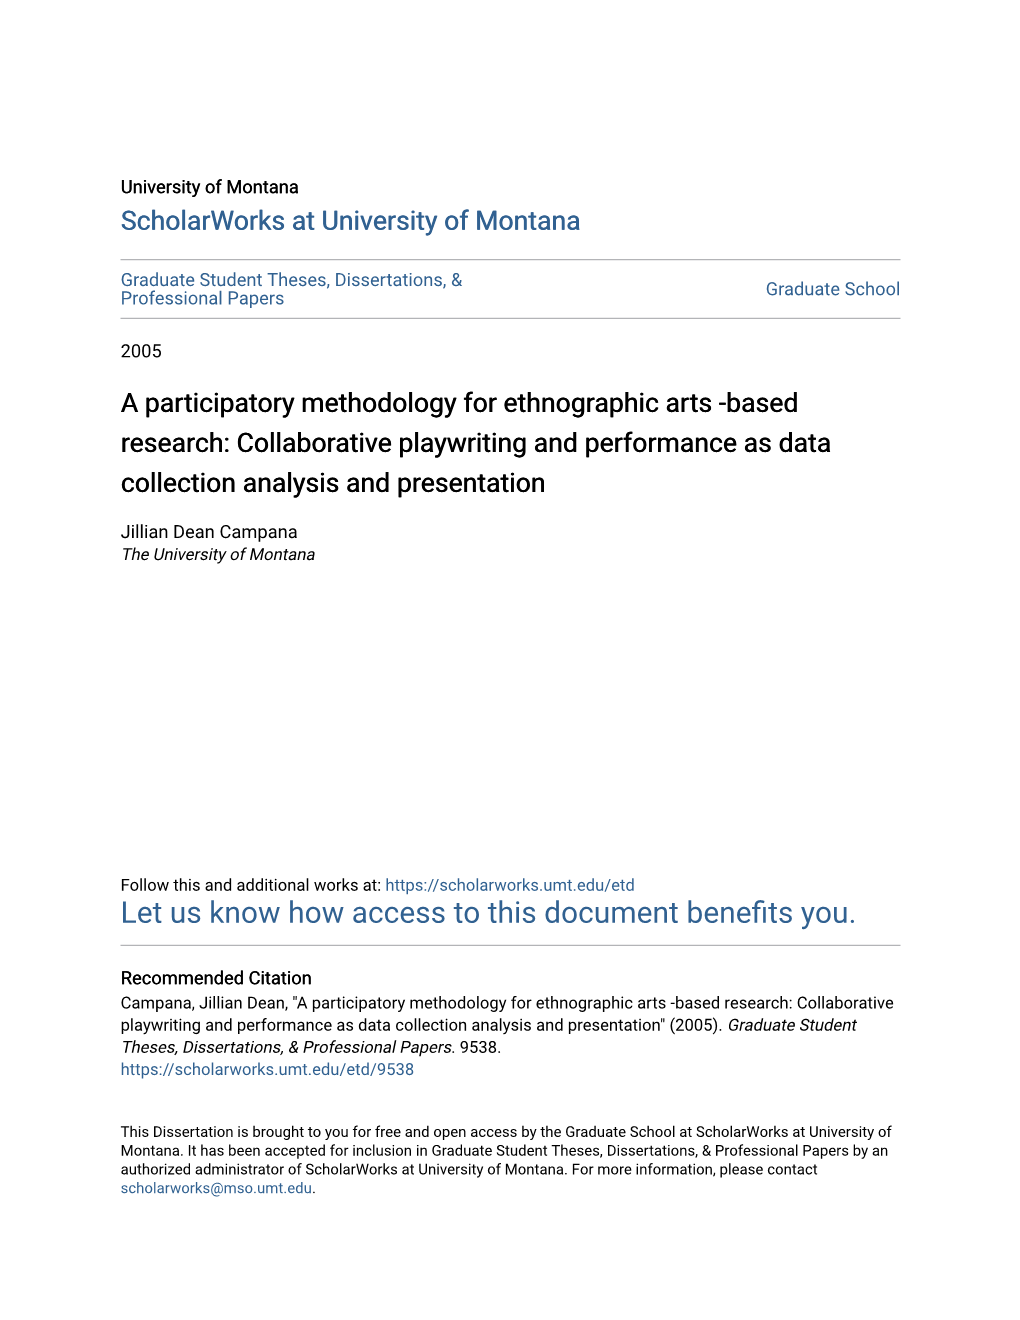 A Participatory Methodology for Ethnographic Arts -Based Research: Collaborative Playwriting and Performance As Data Collection Analysis and Presentation